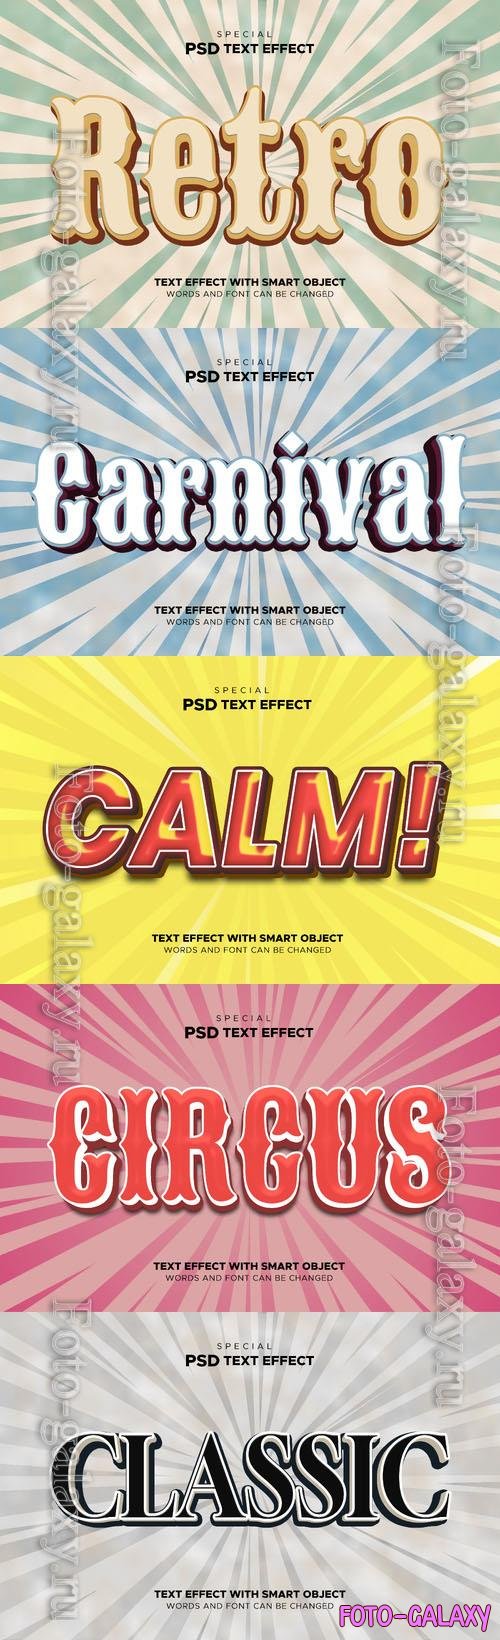 Psd style text effect editable collection vol 333 